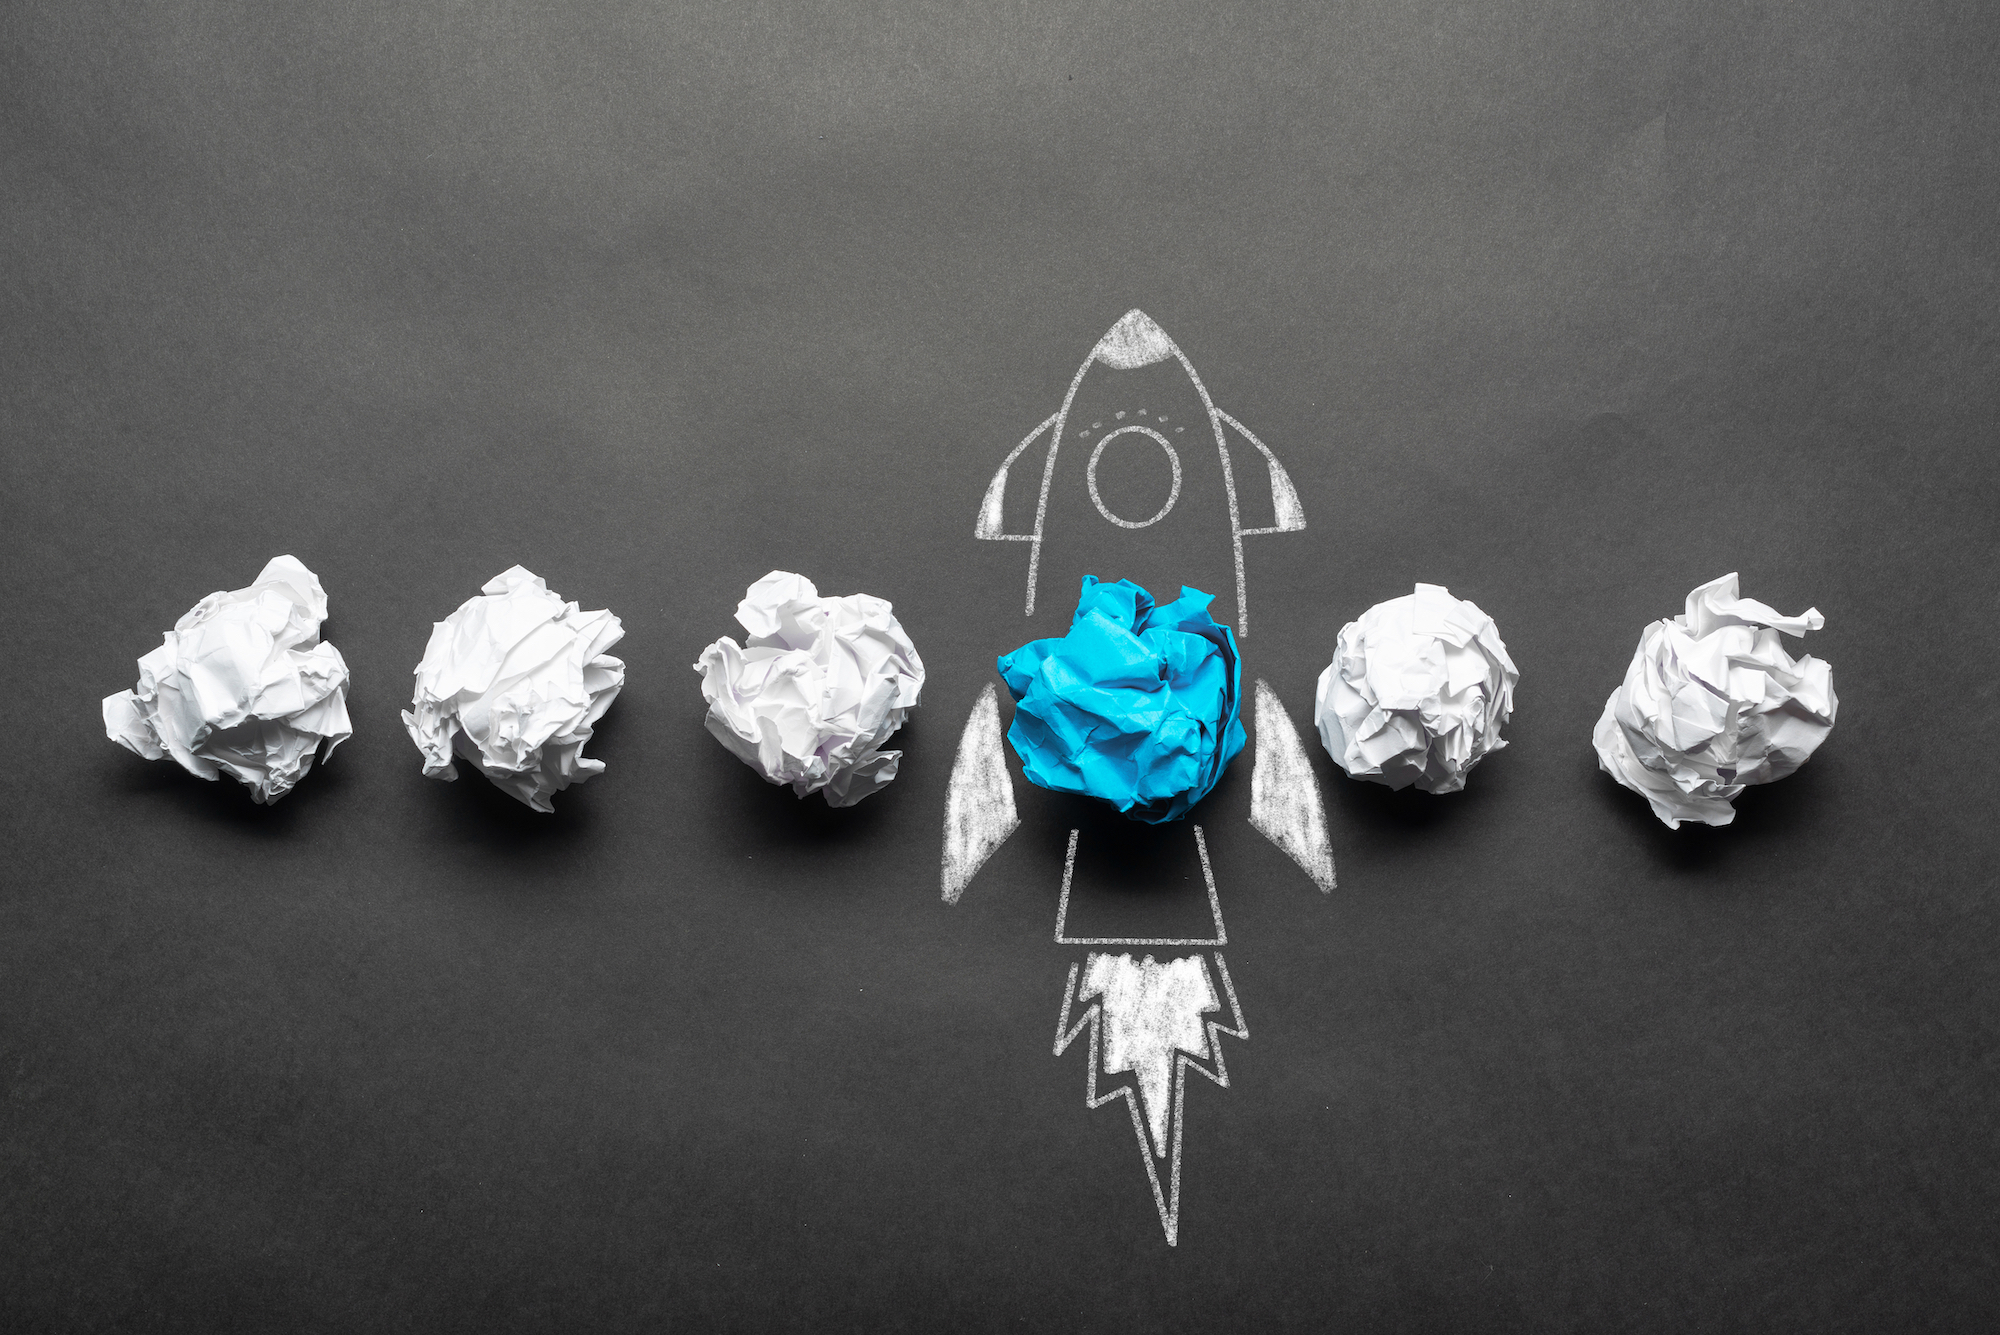 A drawn rocketship surrounded by crumpled pieces of paper, indicating an idea startup.